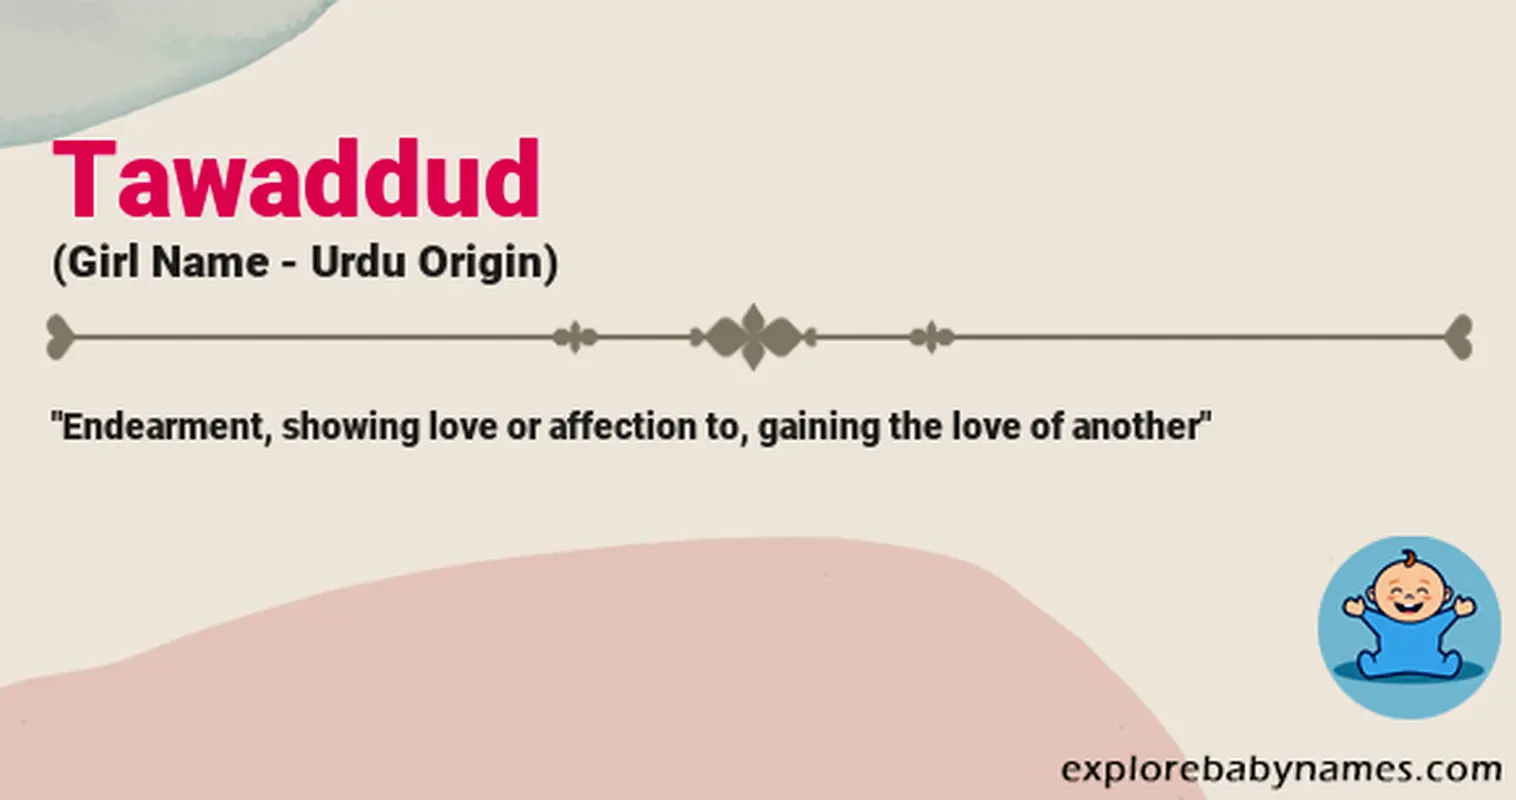 Meaning of Tawaddud